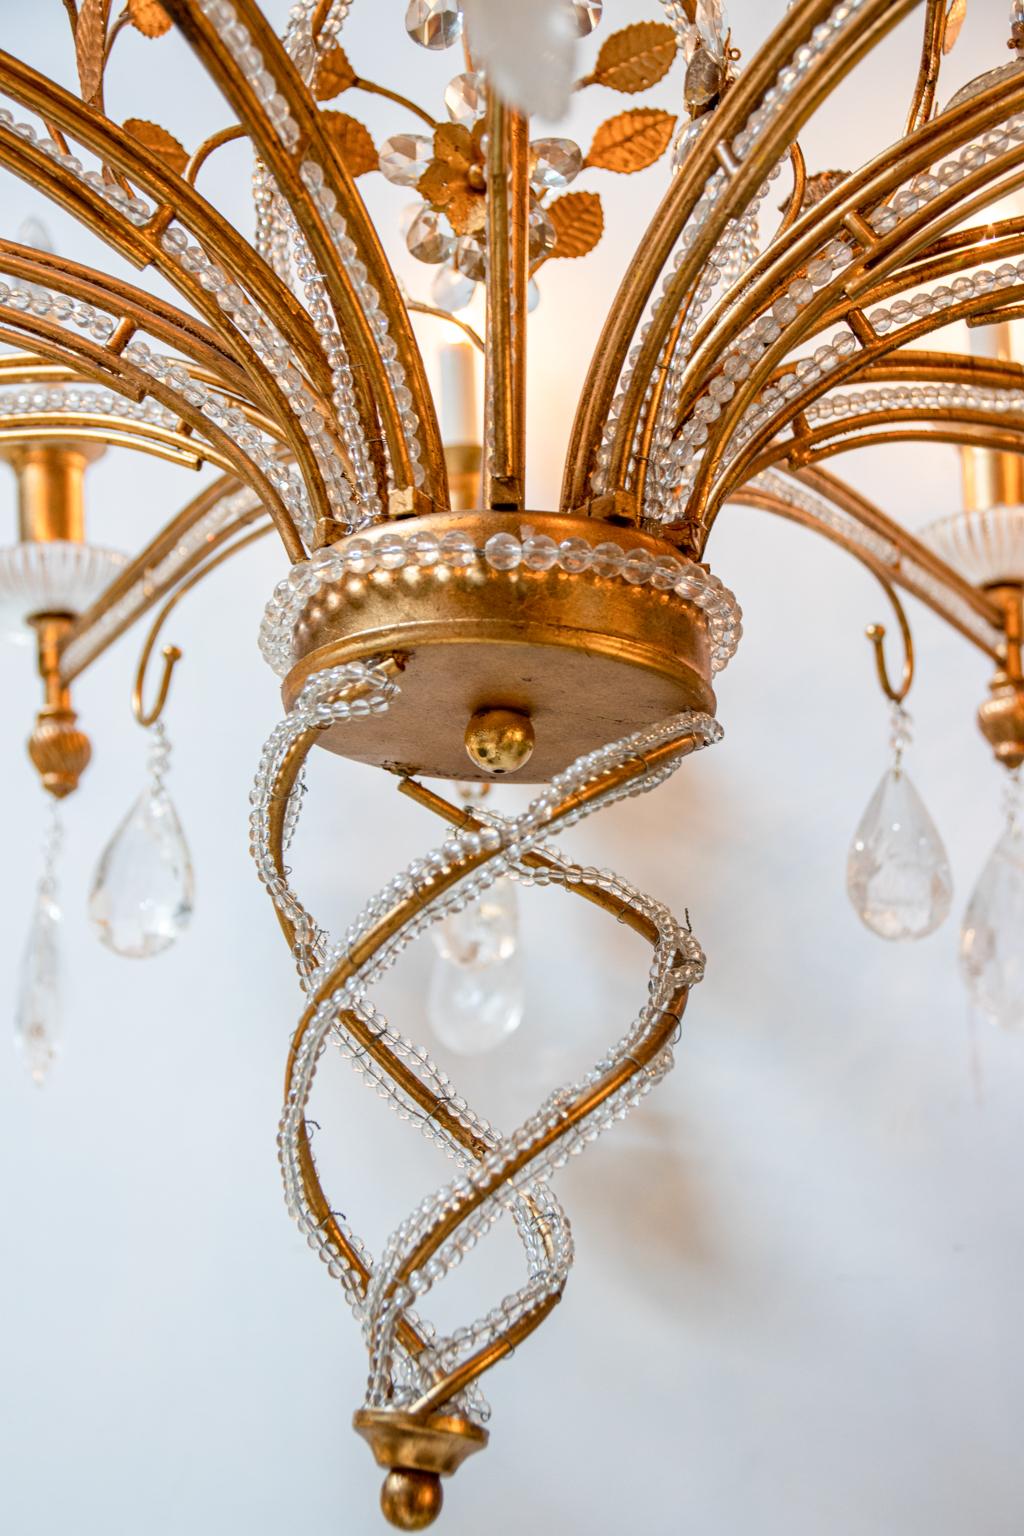 Circa mid-20th century Baroque style rock crystal chandelier with gilded metal, beaded strands accenting the arms, and foliage motifs. The piece is further decorated throughout with cut rock crystal prisms in the shape of pendant almonds along with